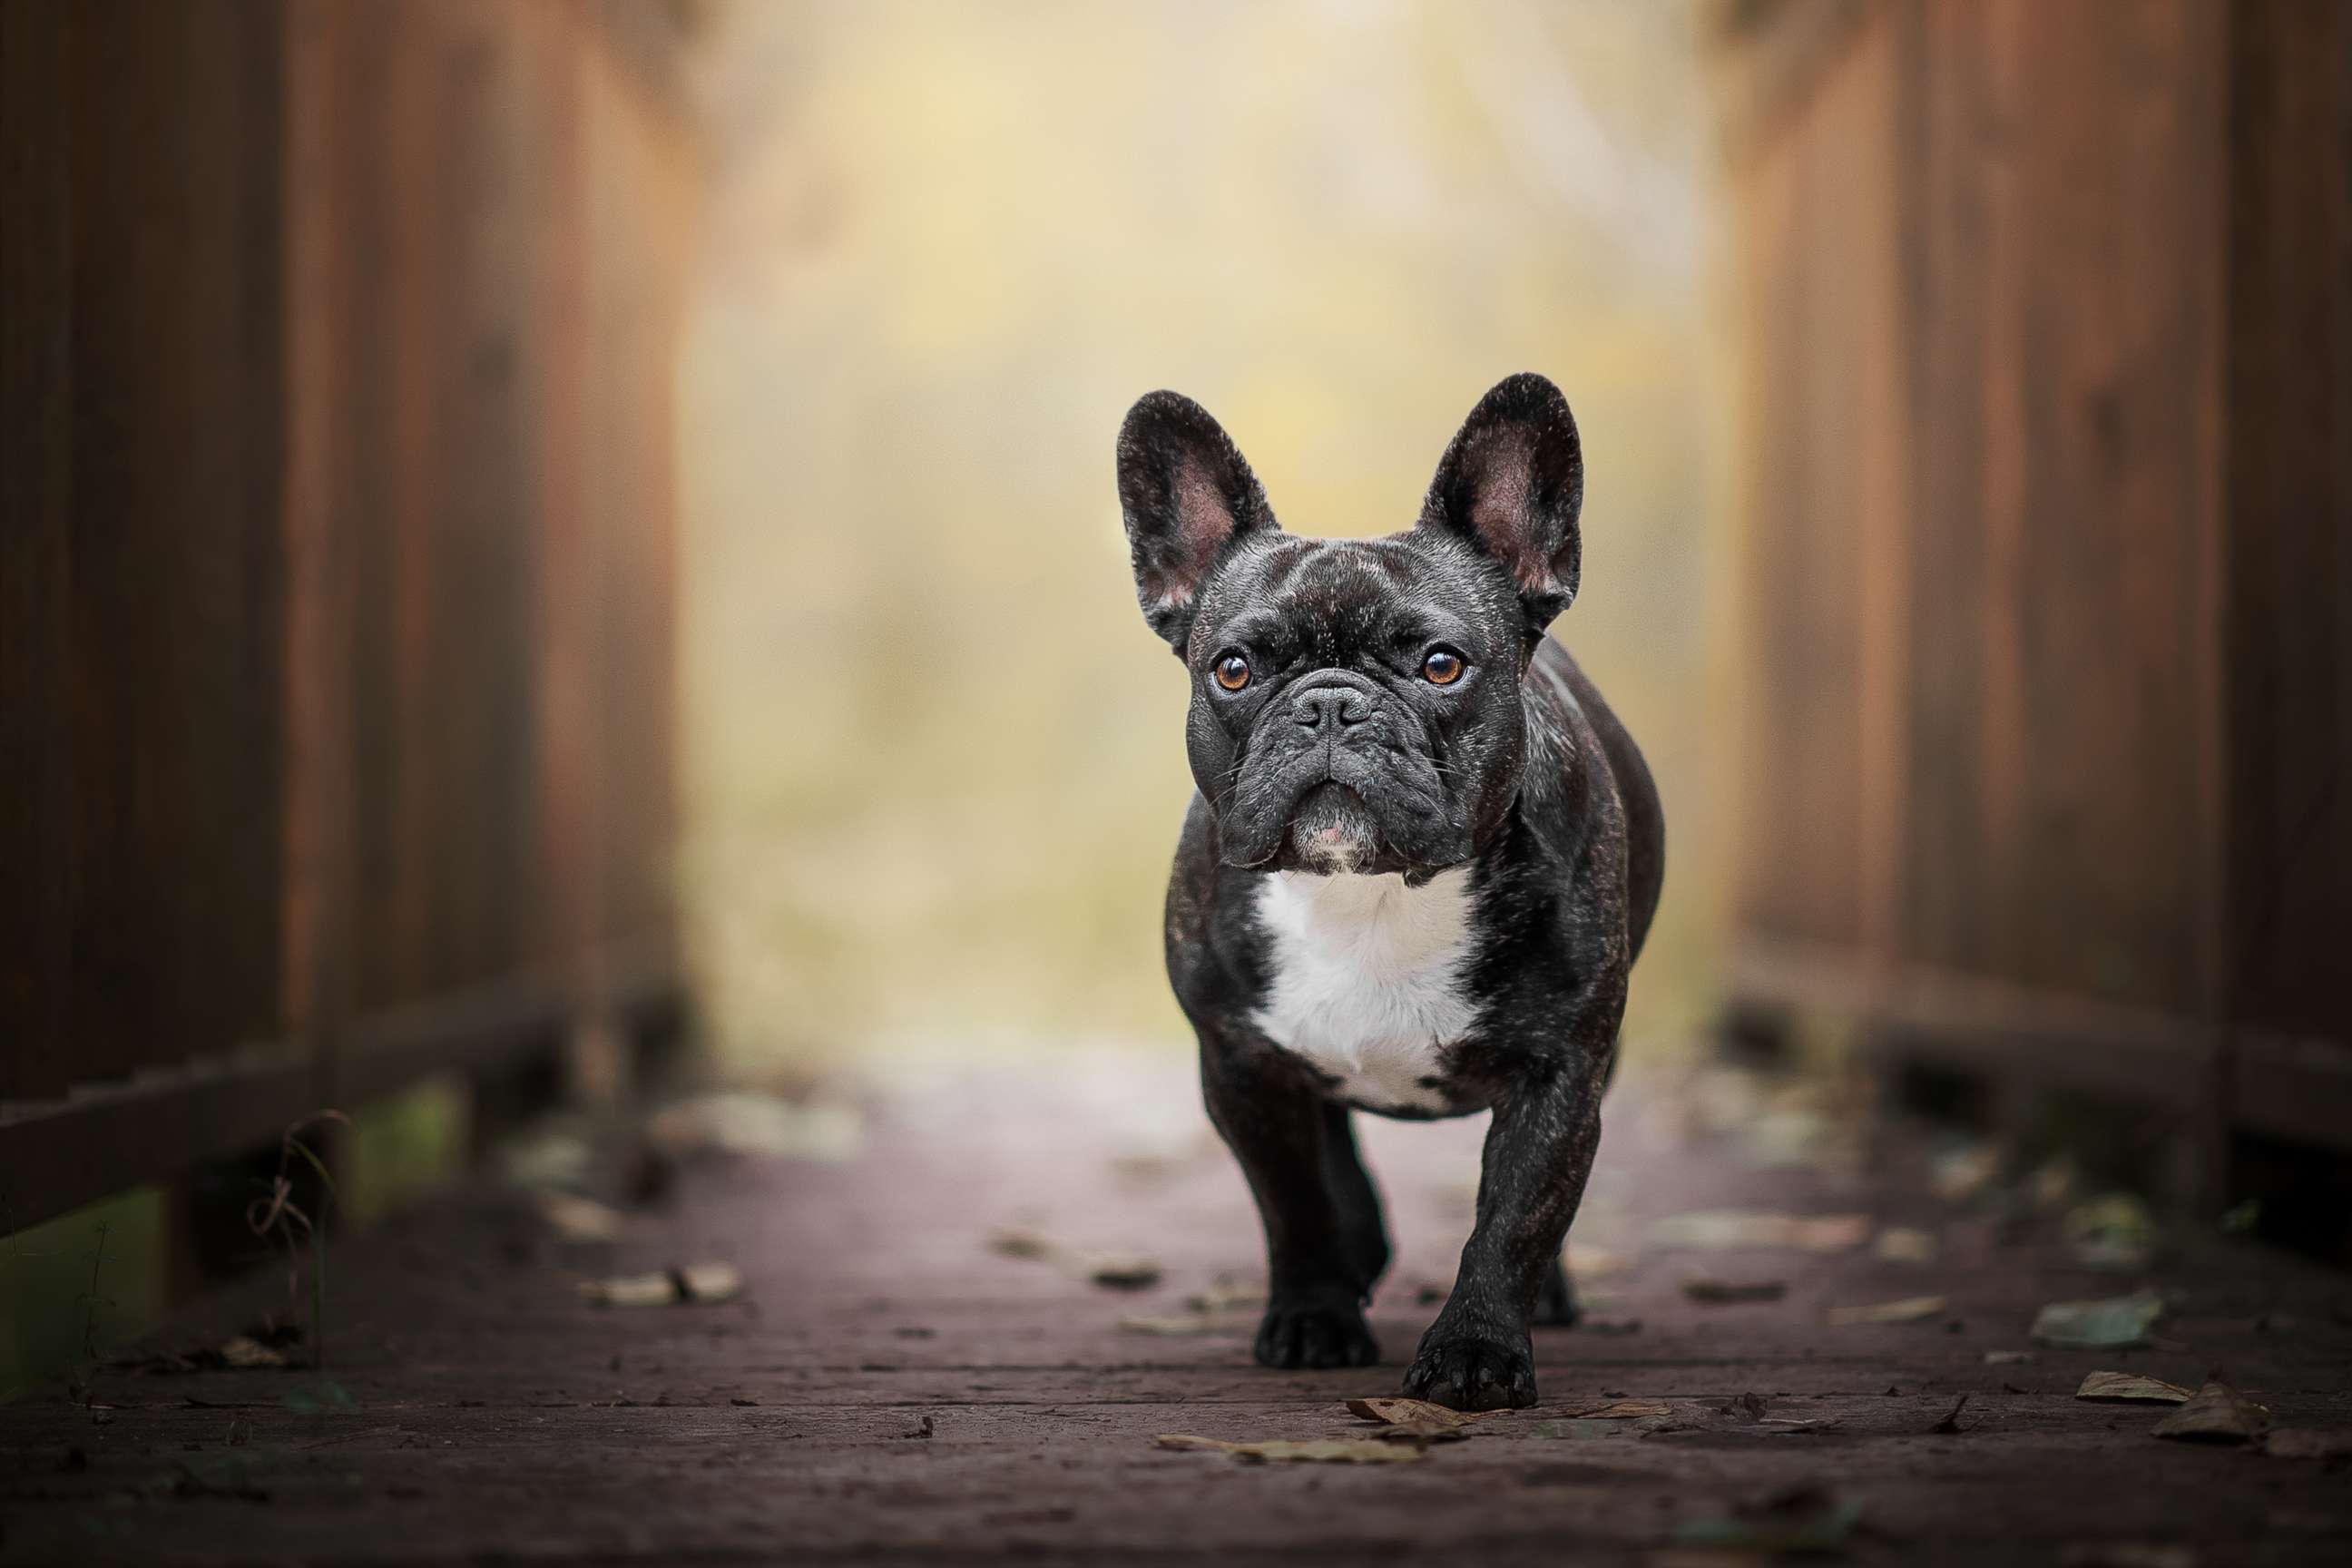 PHOTO: In this undated file photo, a French bulldog is shown.